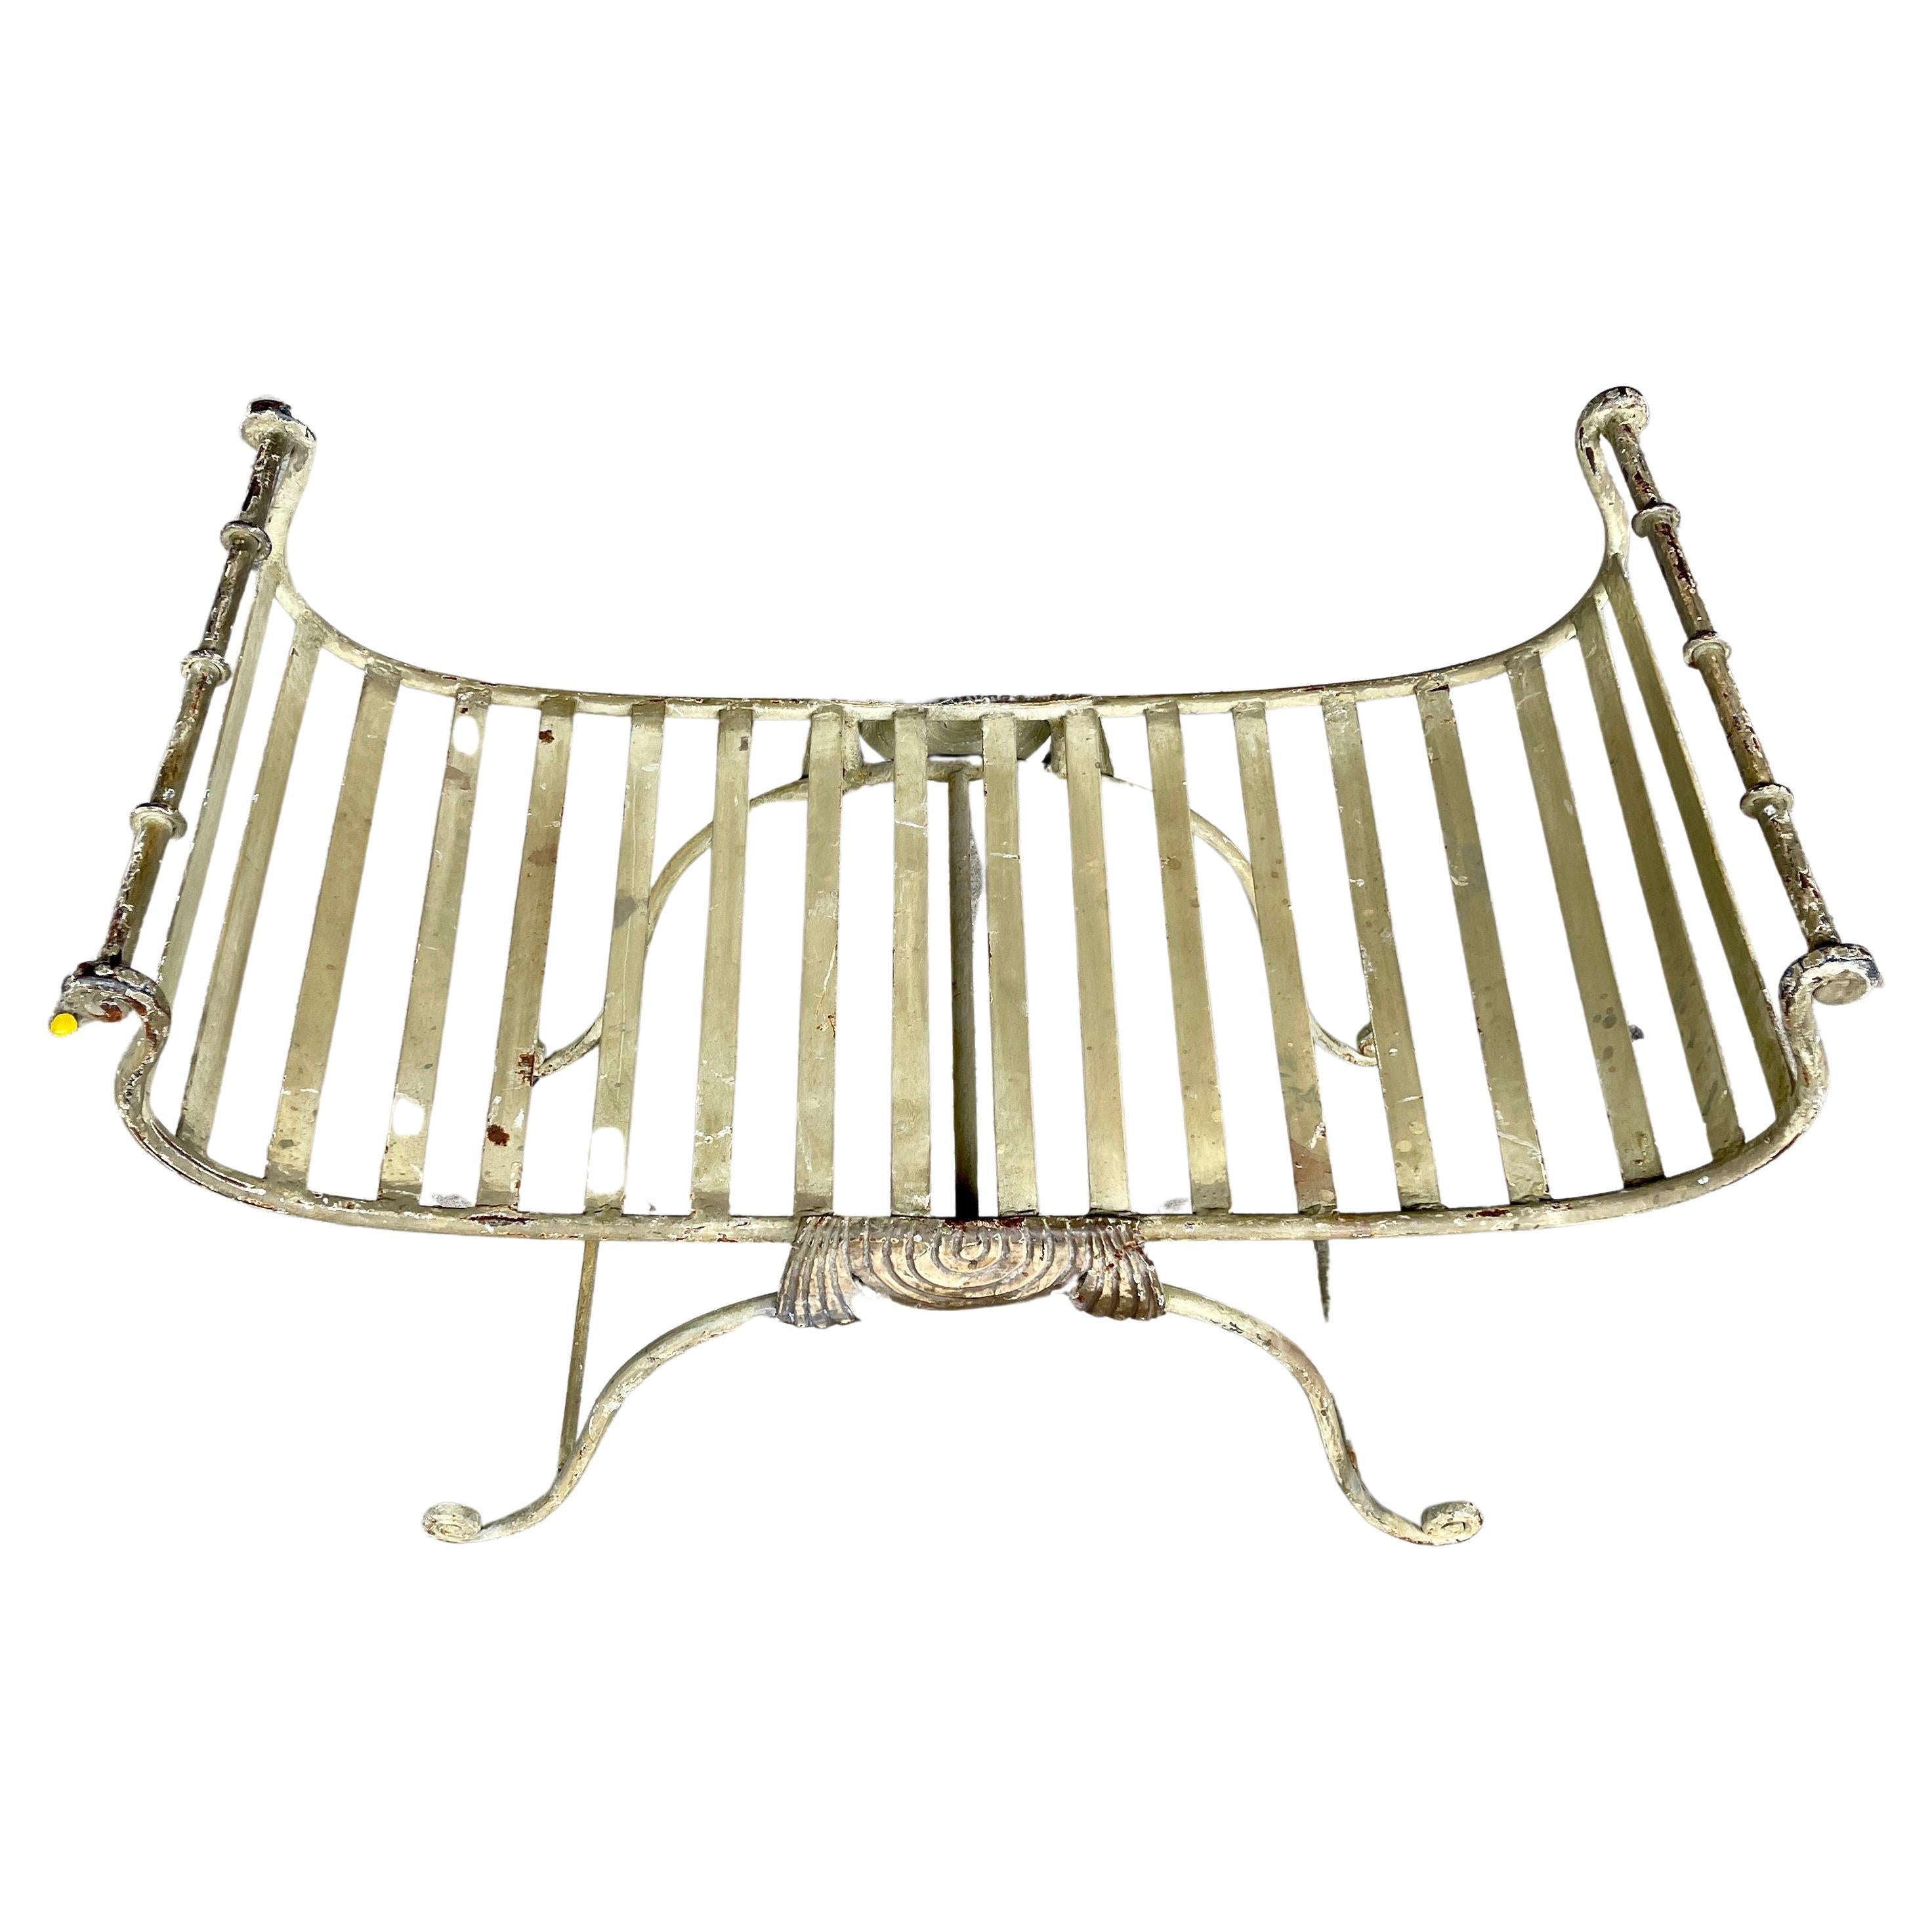 Hand-Painted Large Wide Patio Garden Painted Iron Seat Bench, Circa 1930-1950 For Sale